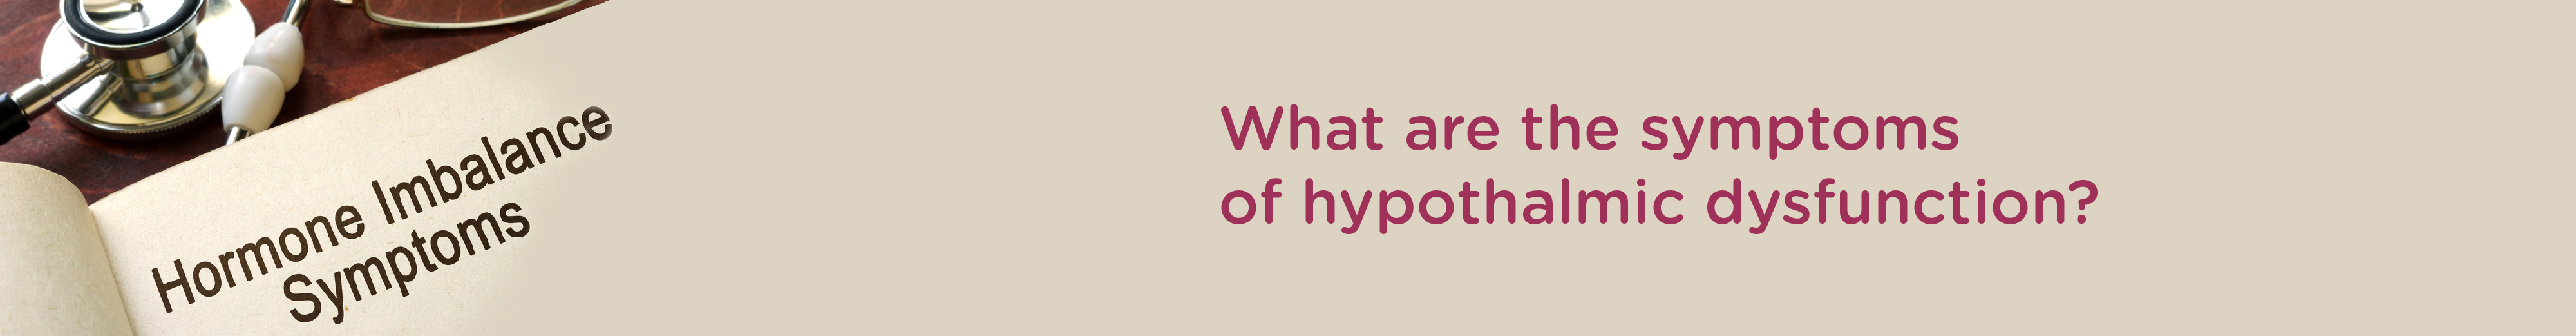 What are the symptoms of hypothalmic dysfunction?